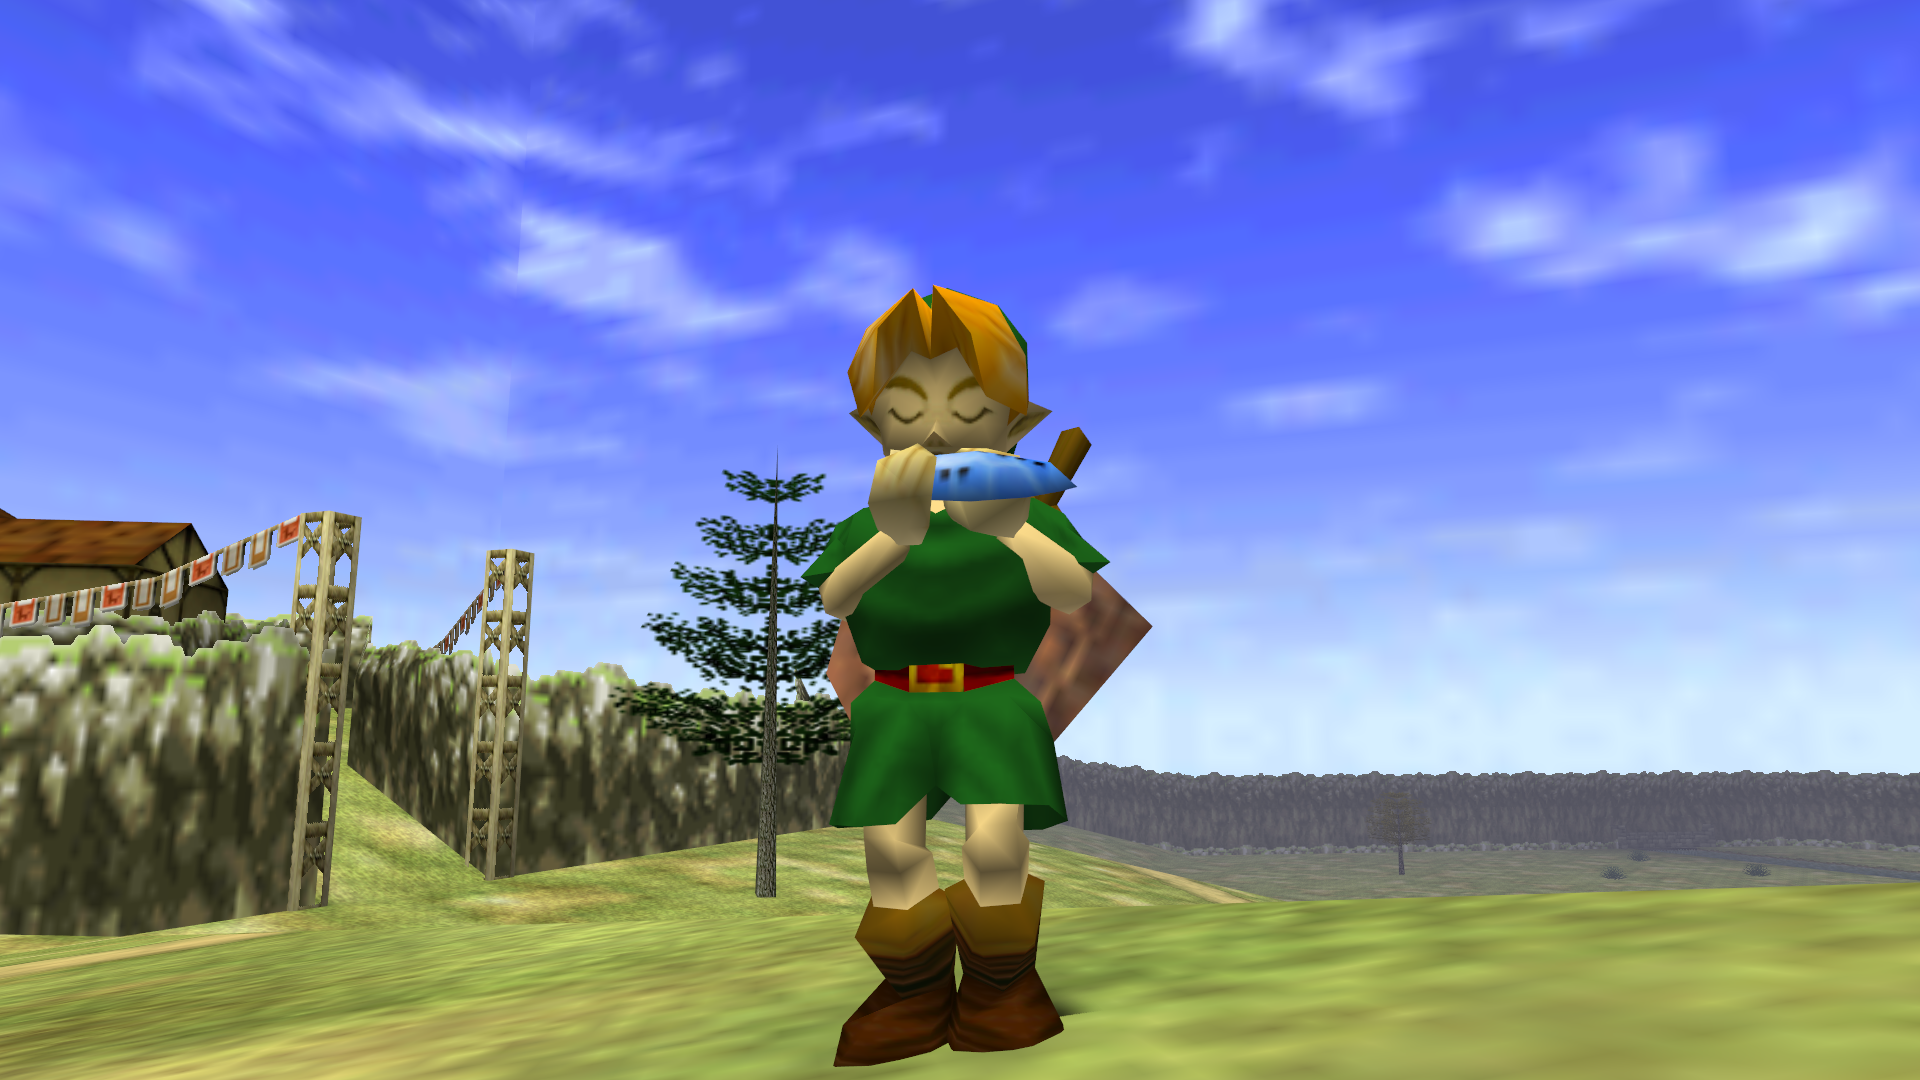 Play Inside the Deku Tree (From The Legend of Zelda: Ocarina of Time) by  The Versions on  Music